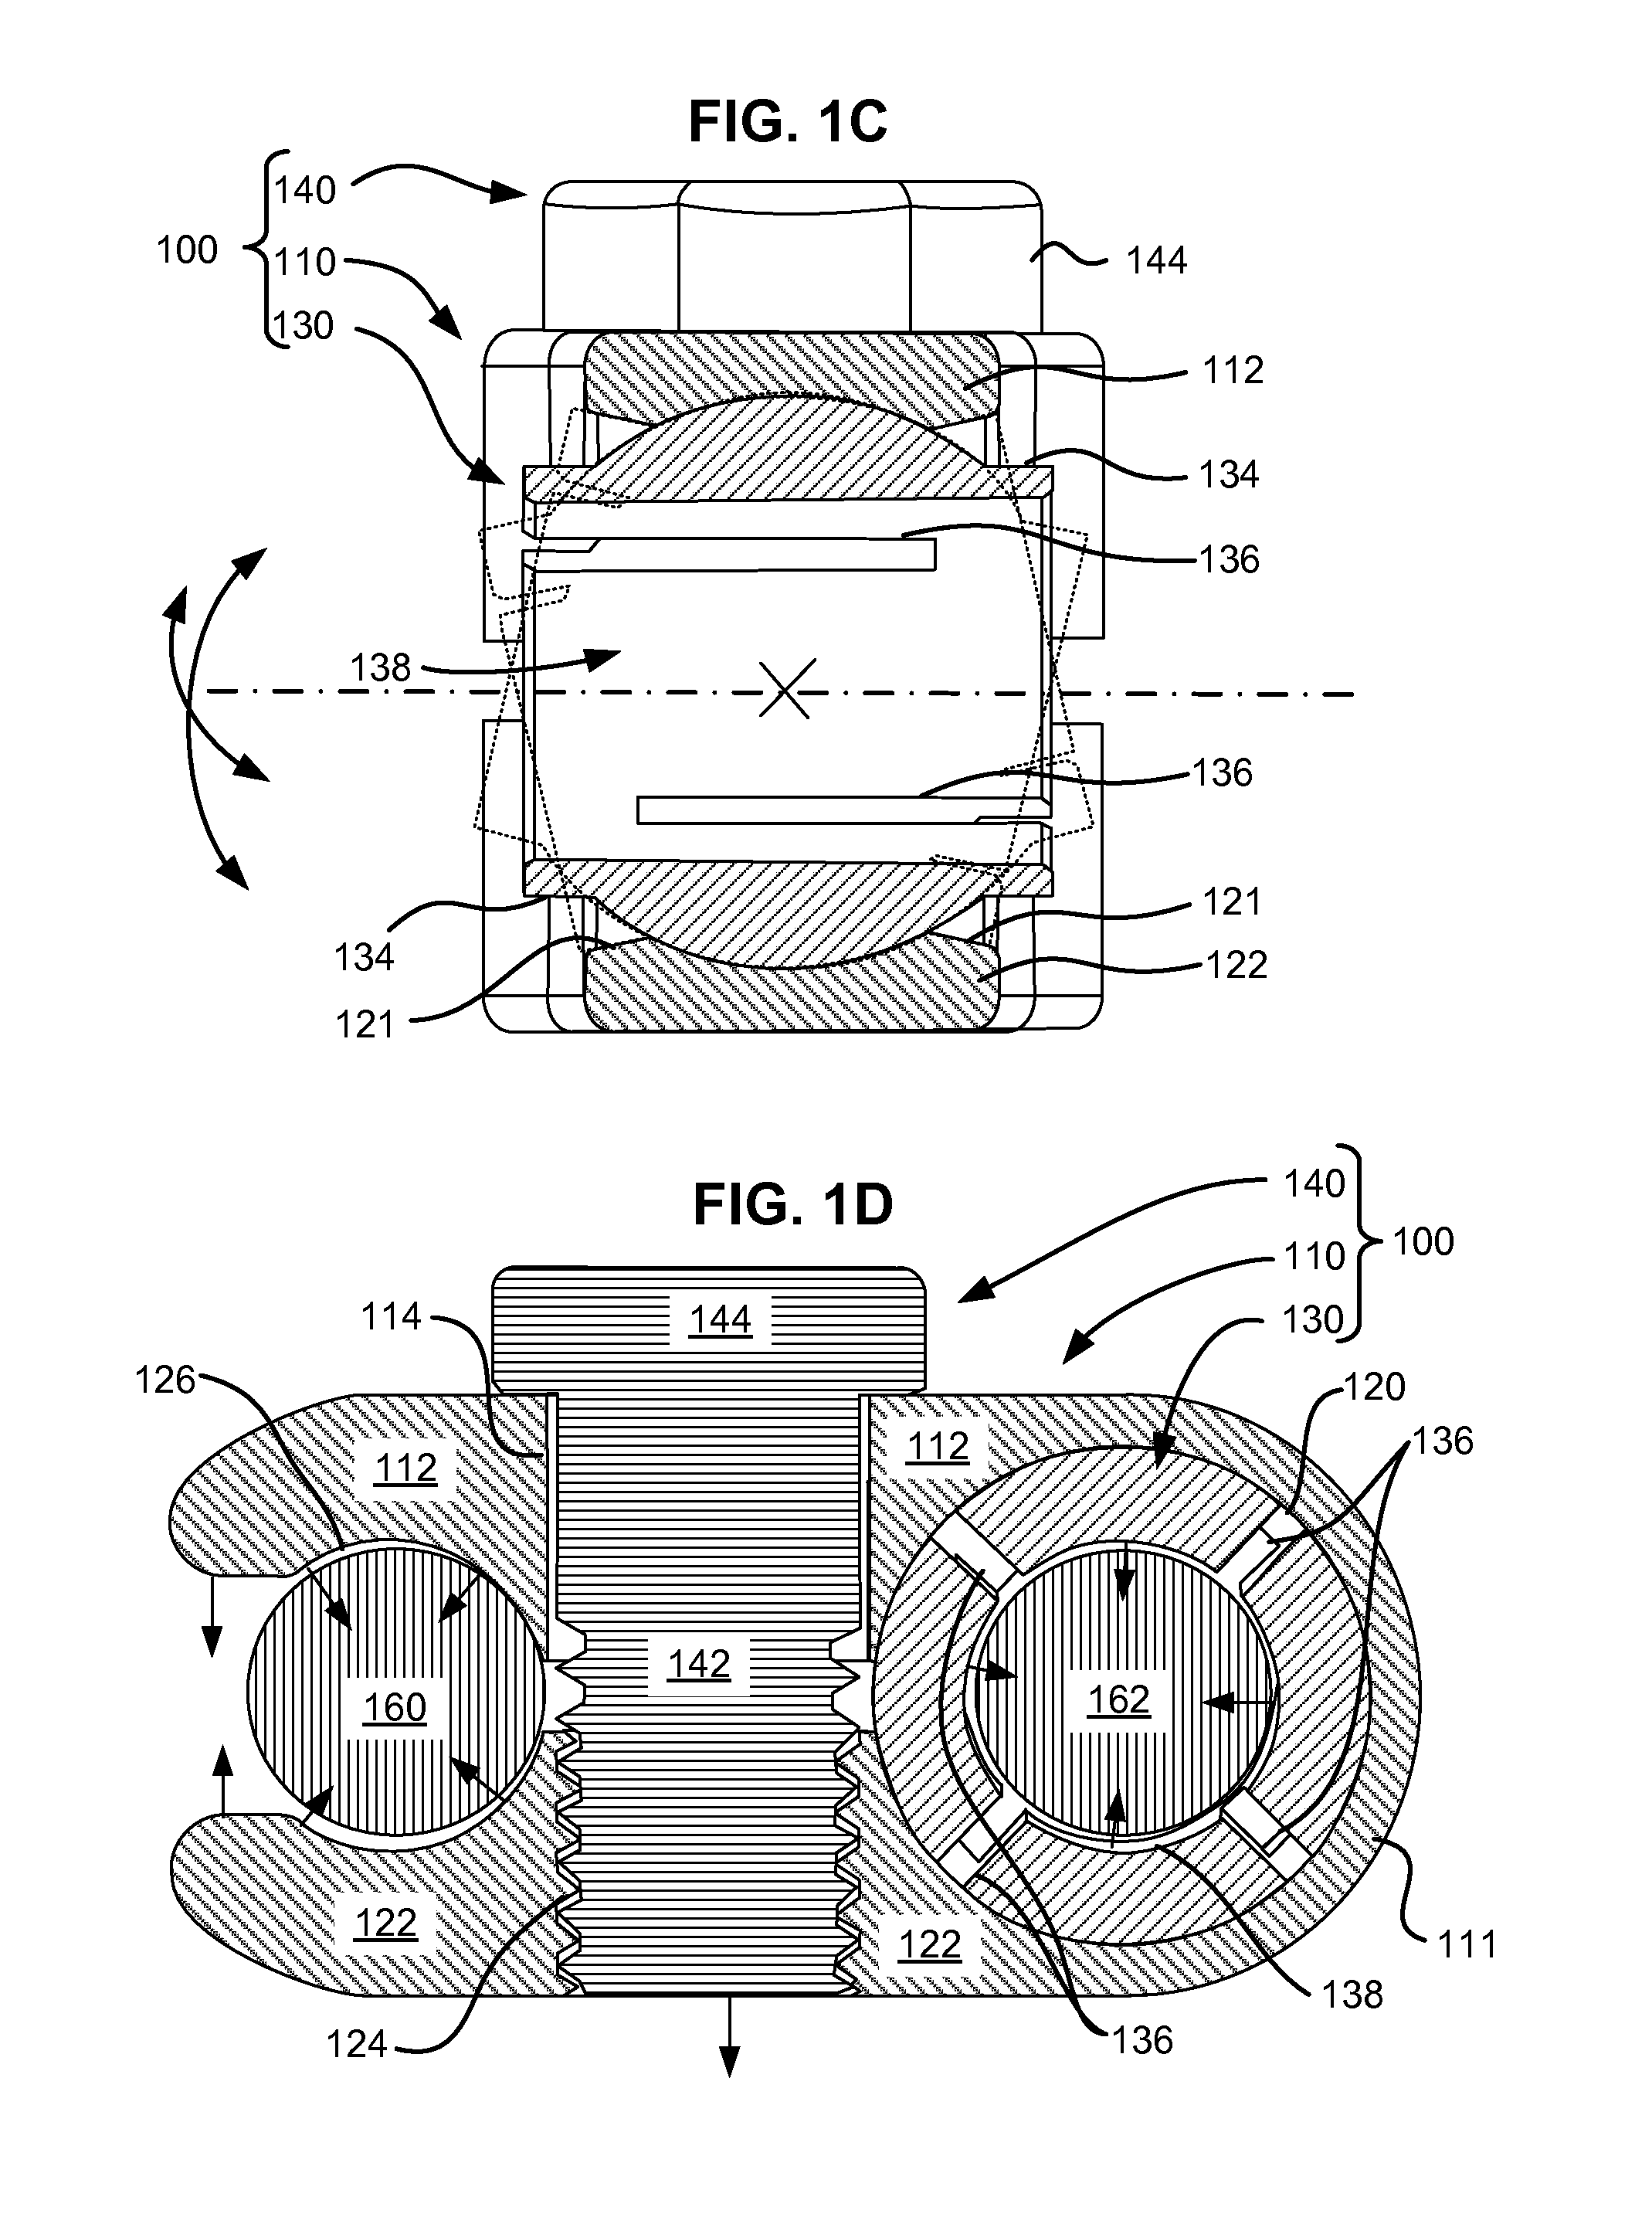 Spinal rod connectors, methods of use, and spinal prosthesis incorporating spinal rod connectors